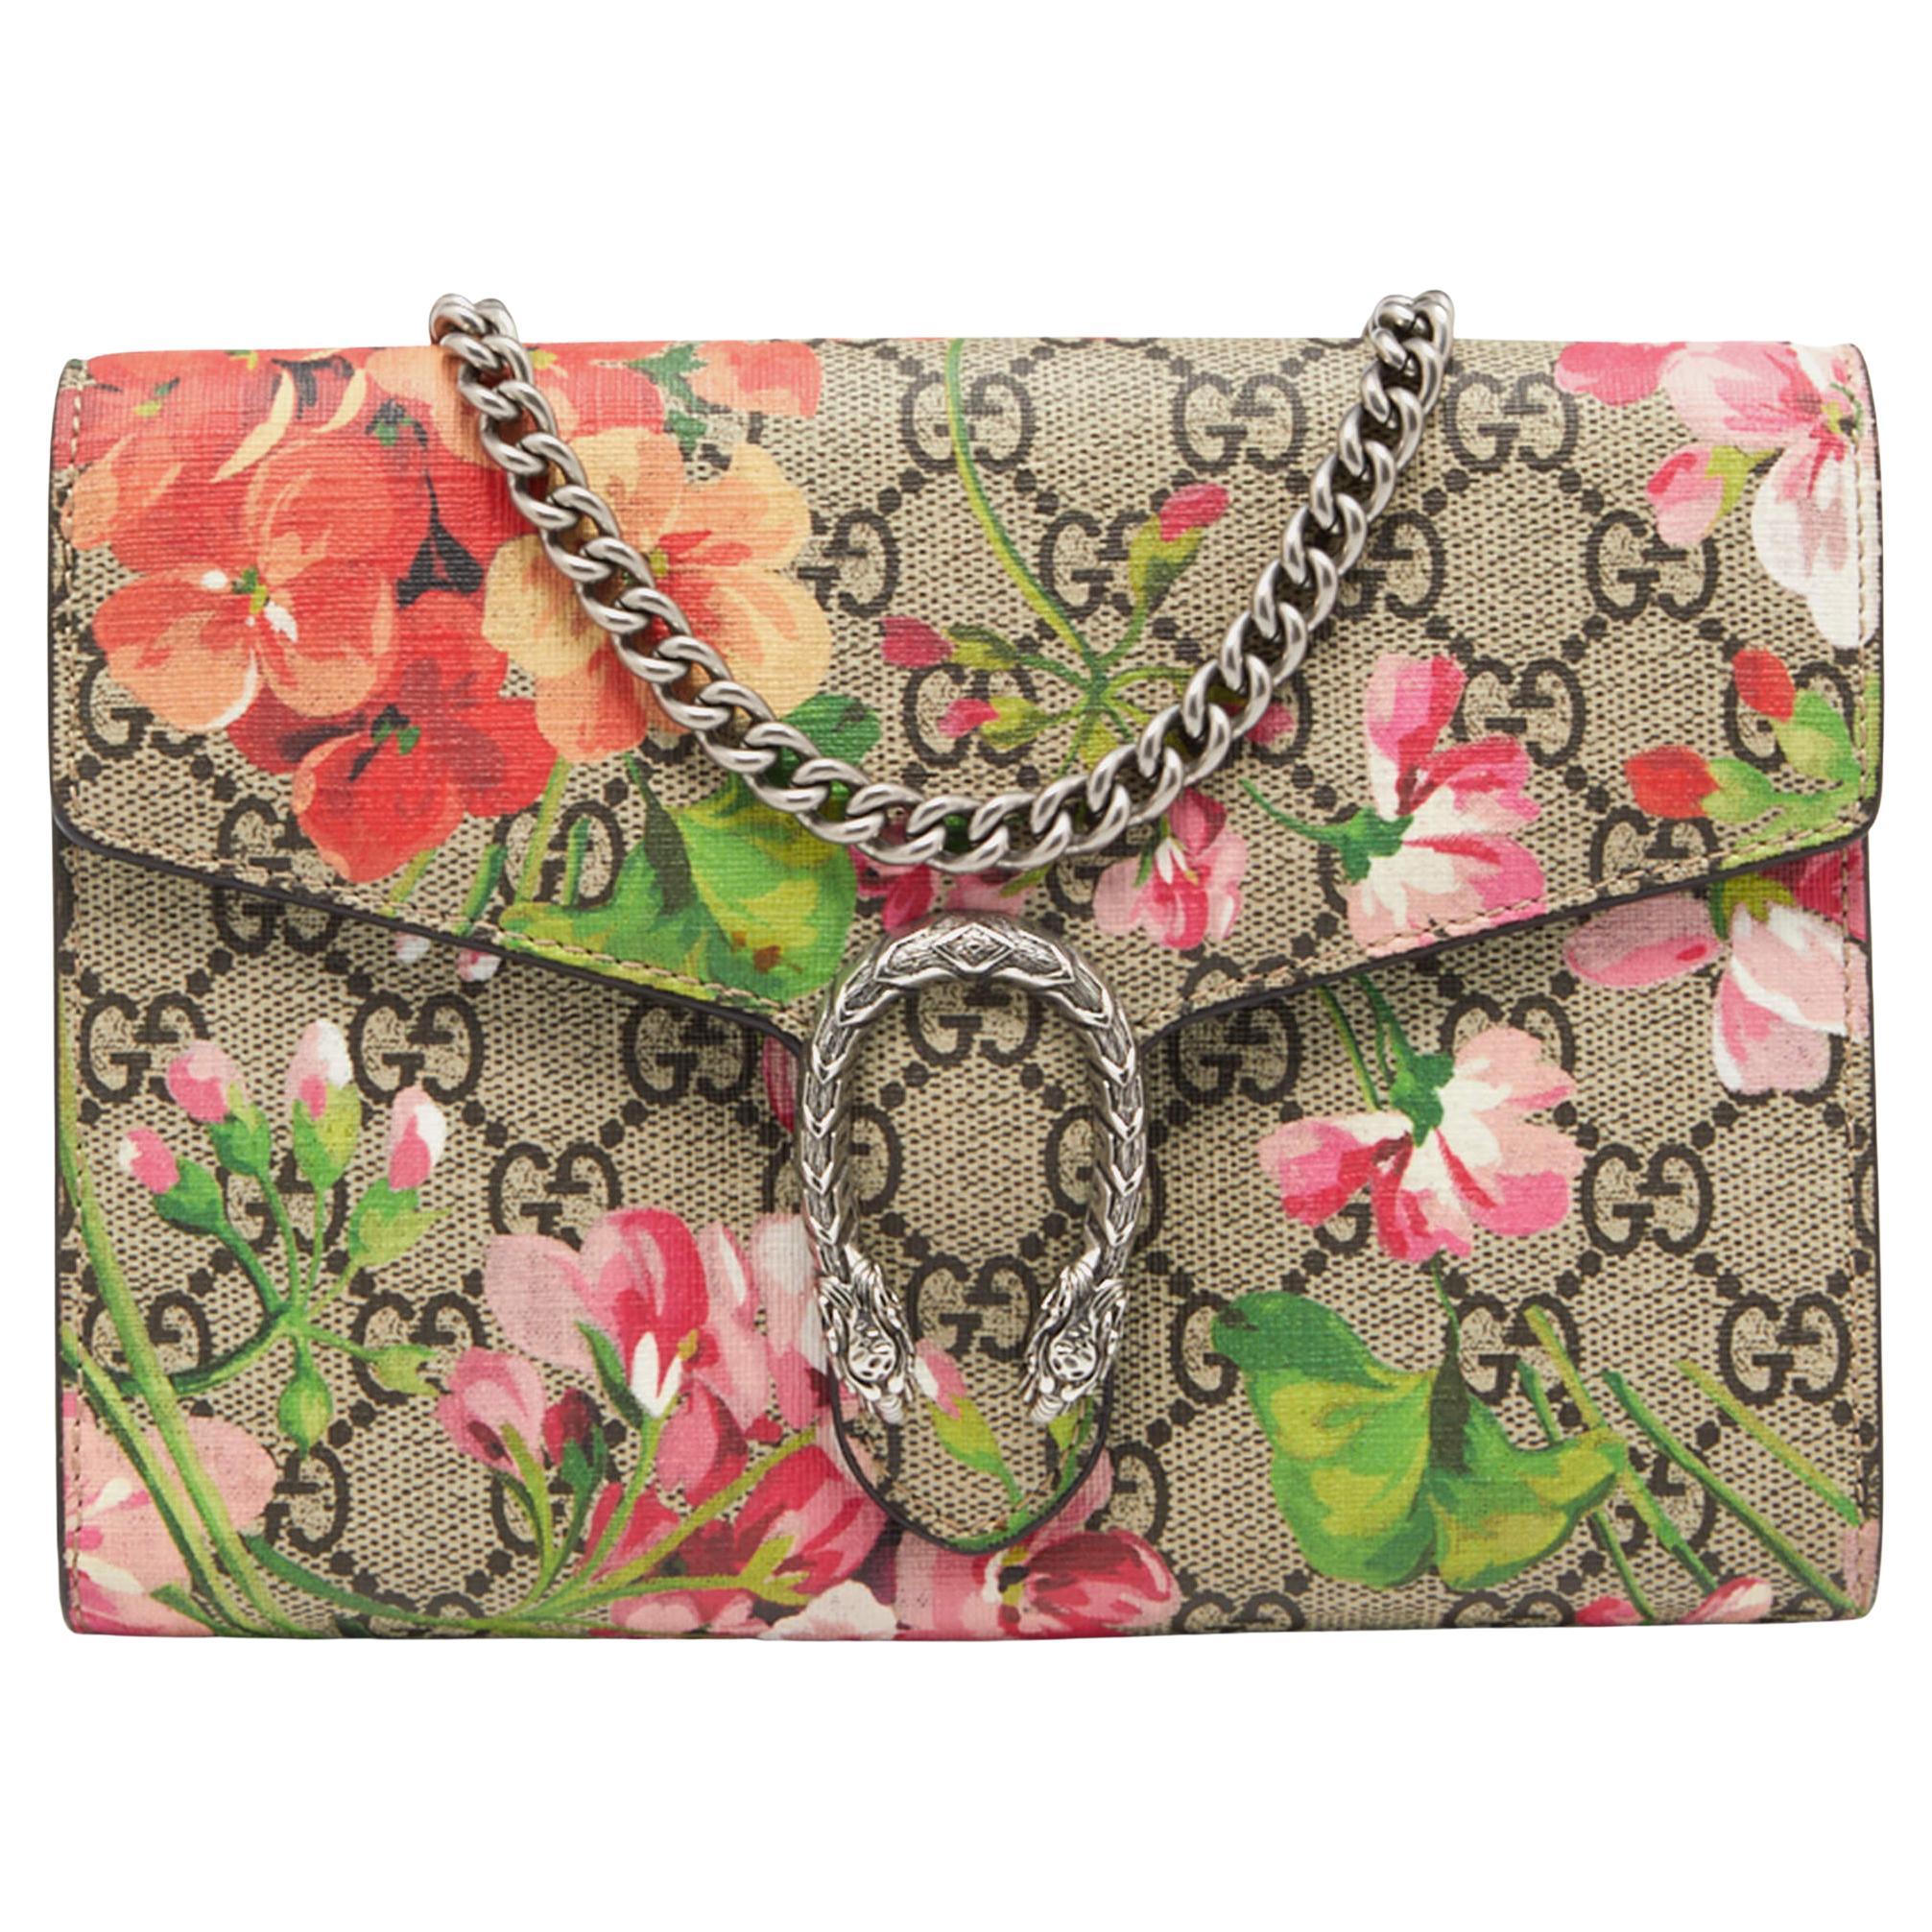 GUCCI Strawberry Printed Bifold Wallet GG Supreme Canvas Pink Red Beige